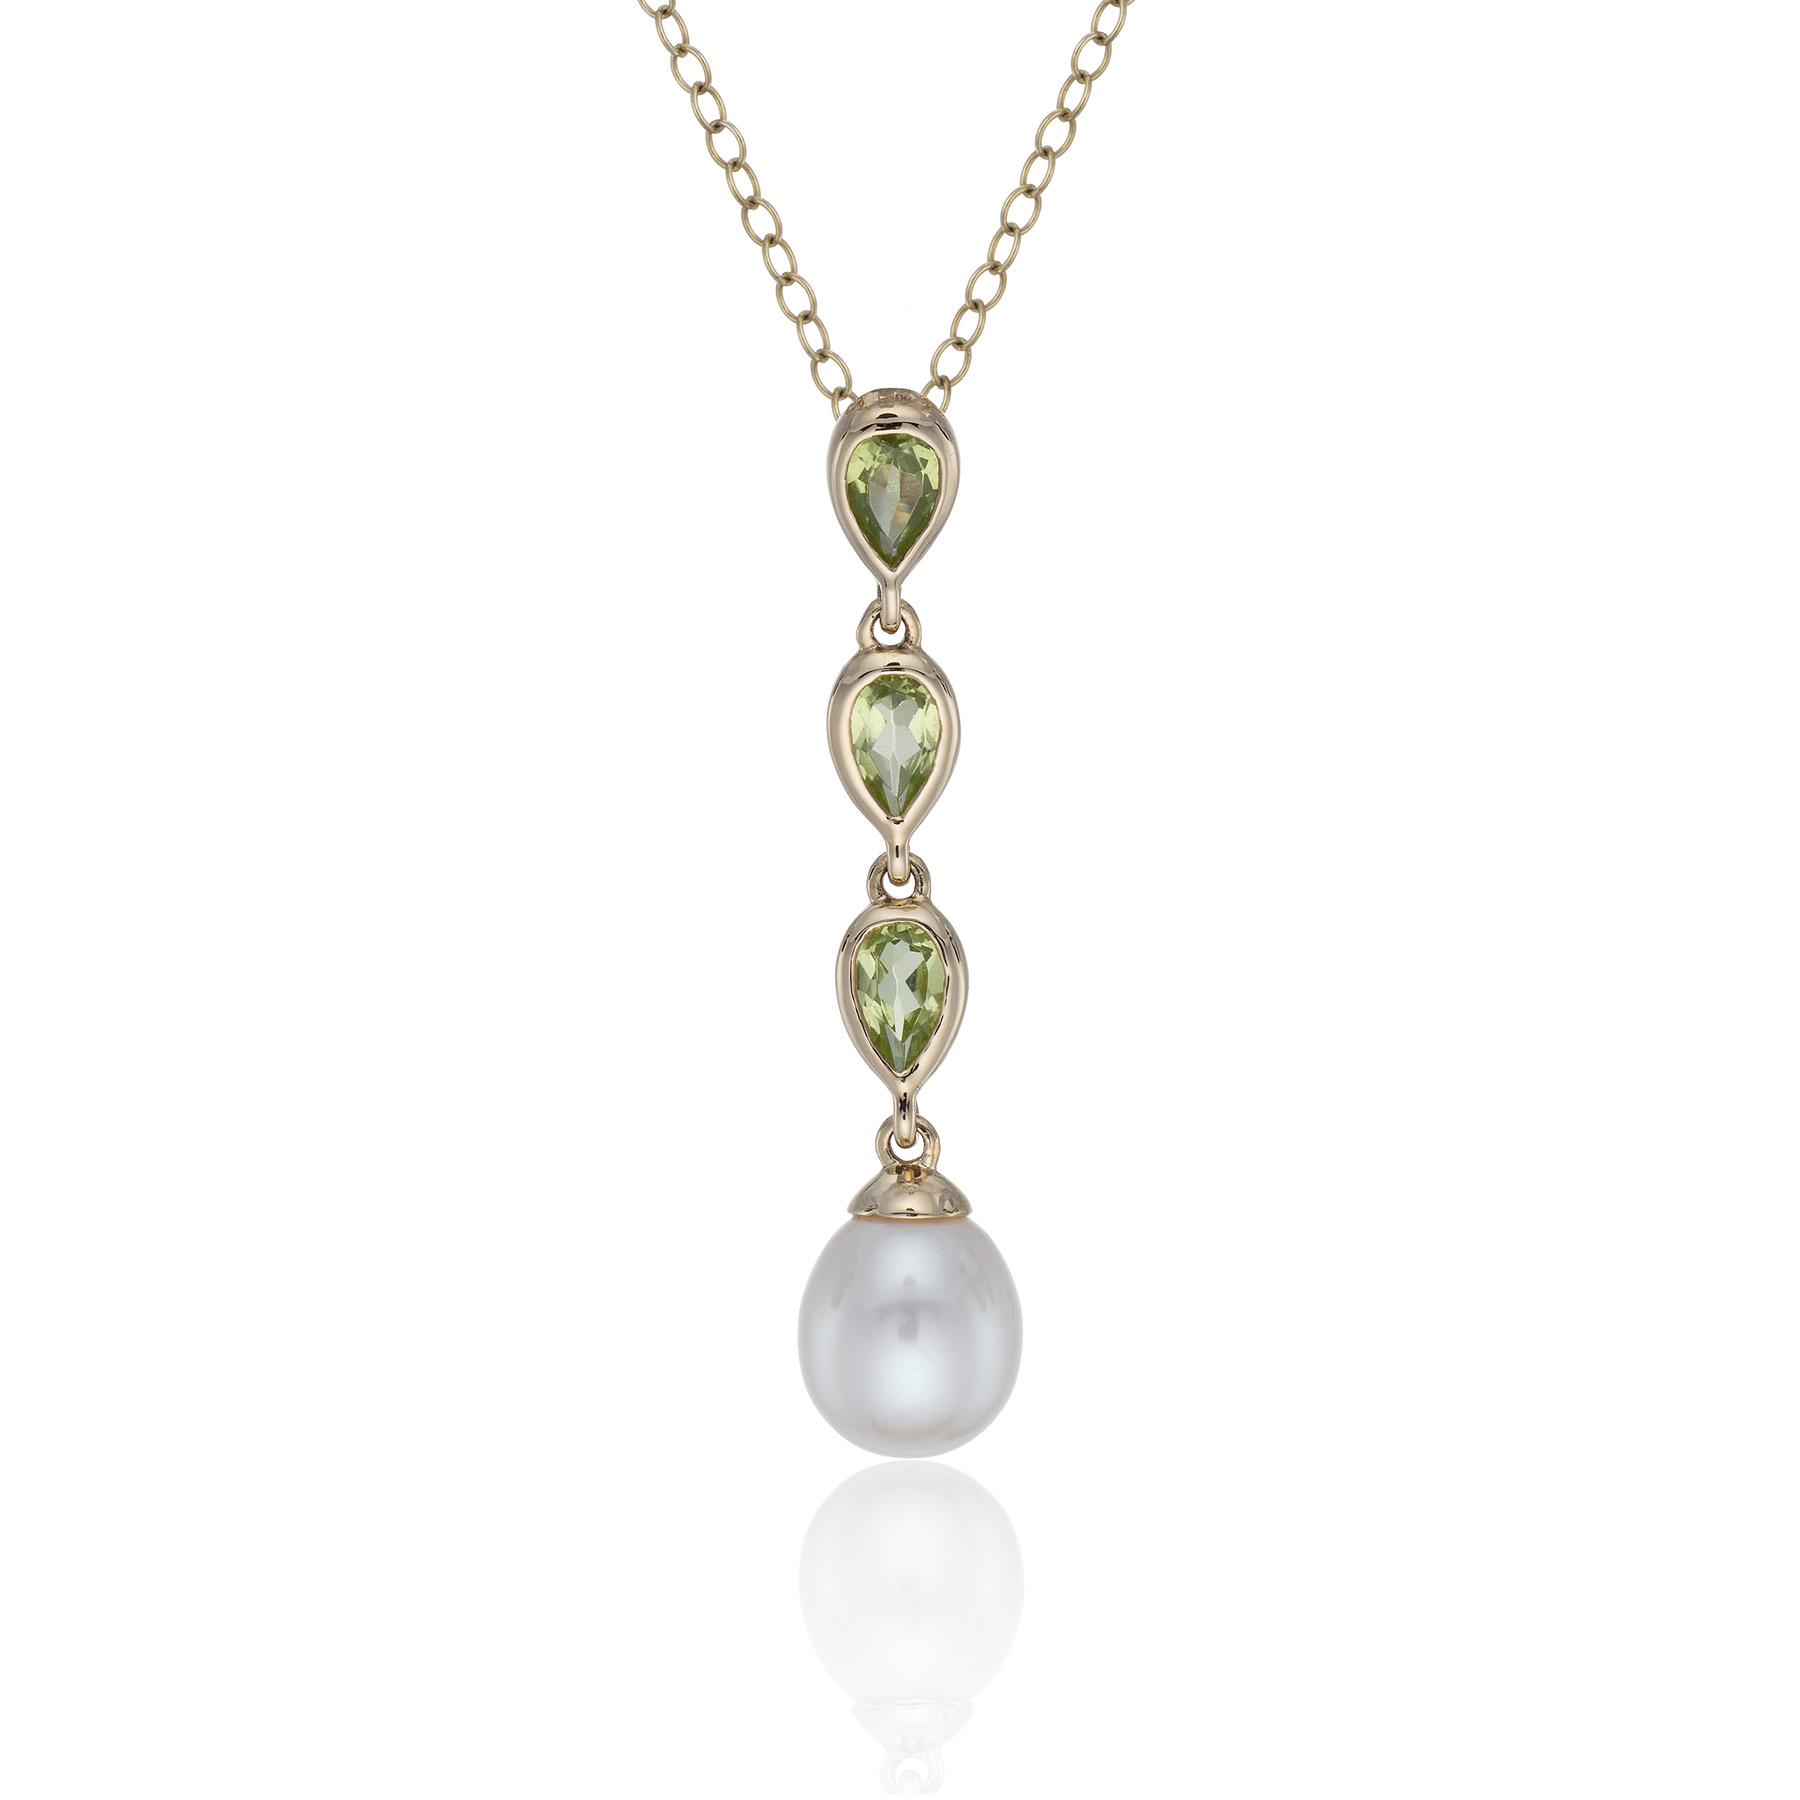 24K Gold Vermeil with Peridot and Pearls Necklace - 